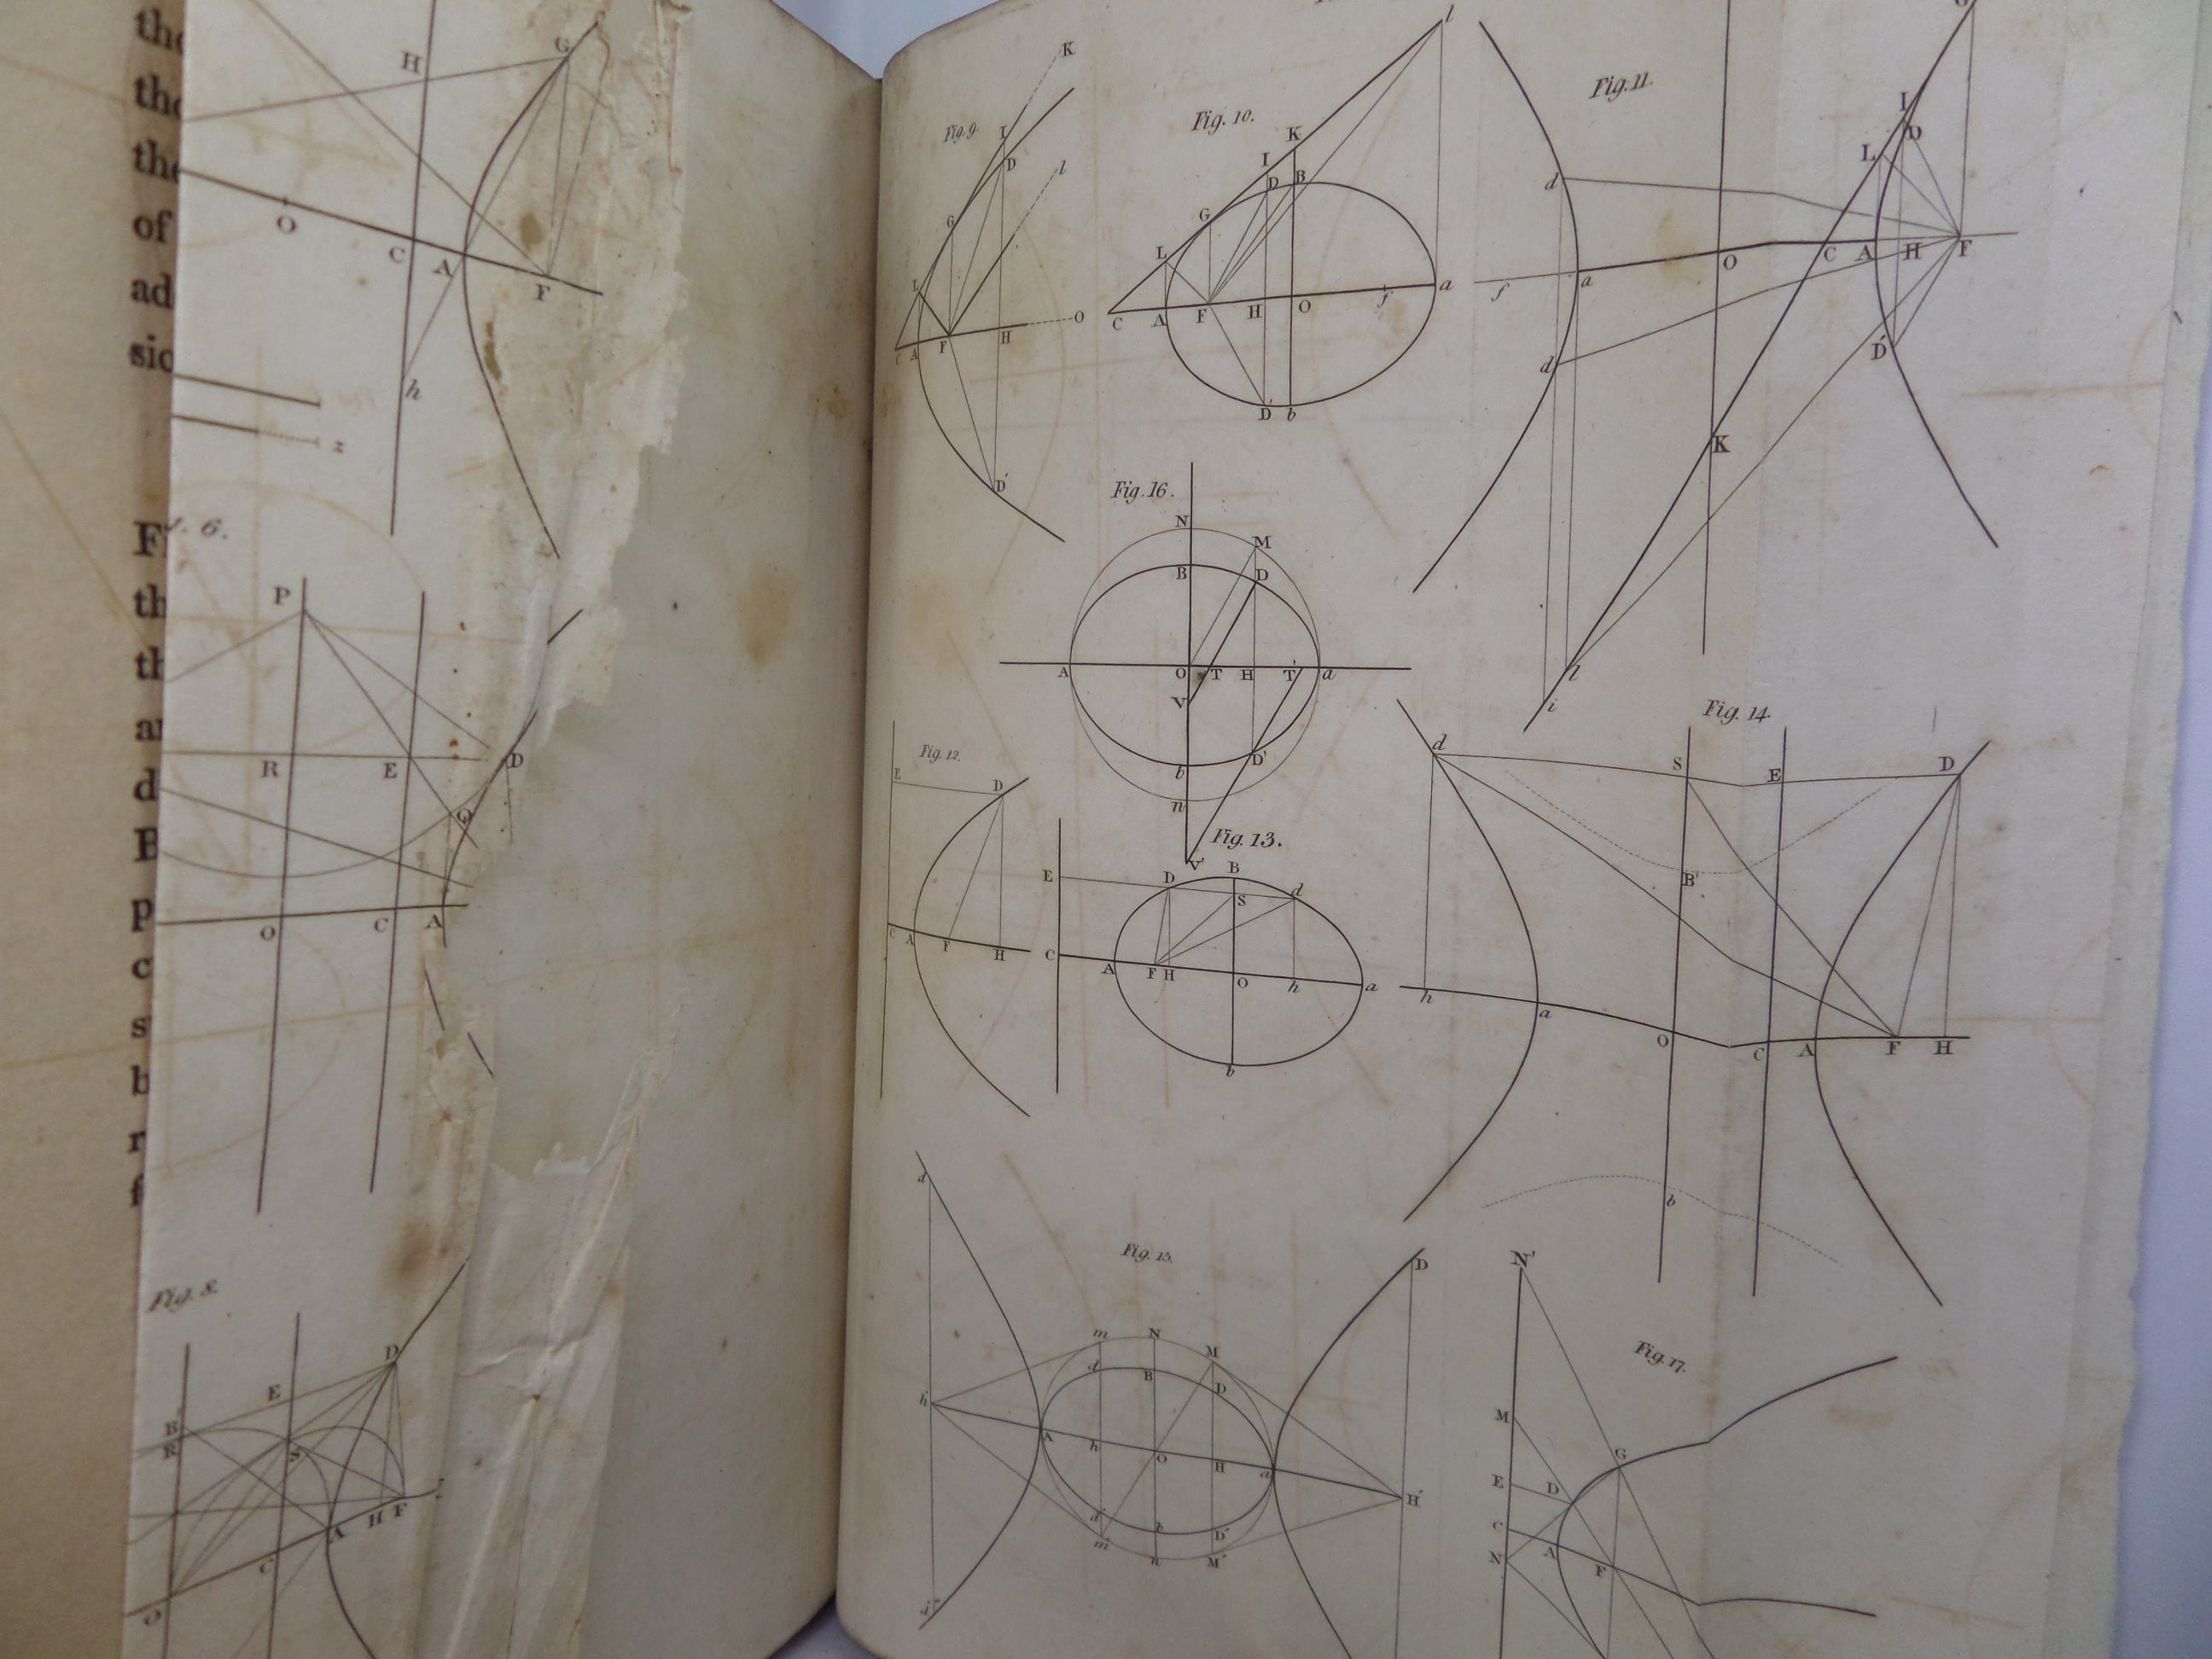 GEOMETRY OF CURVE LINES BY JOHN LESLIE 1813 LEATHER BOUND PRESENTATION COPY